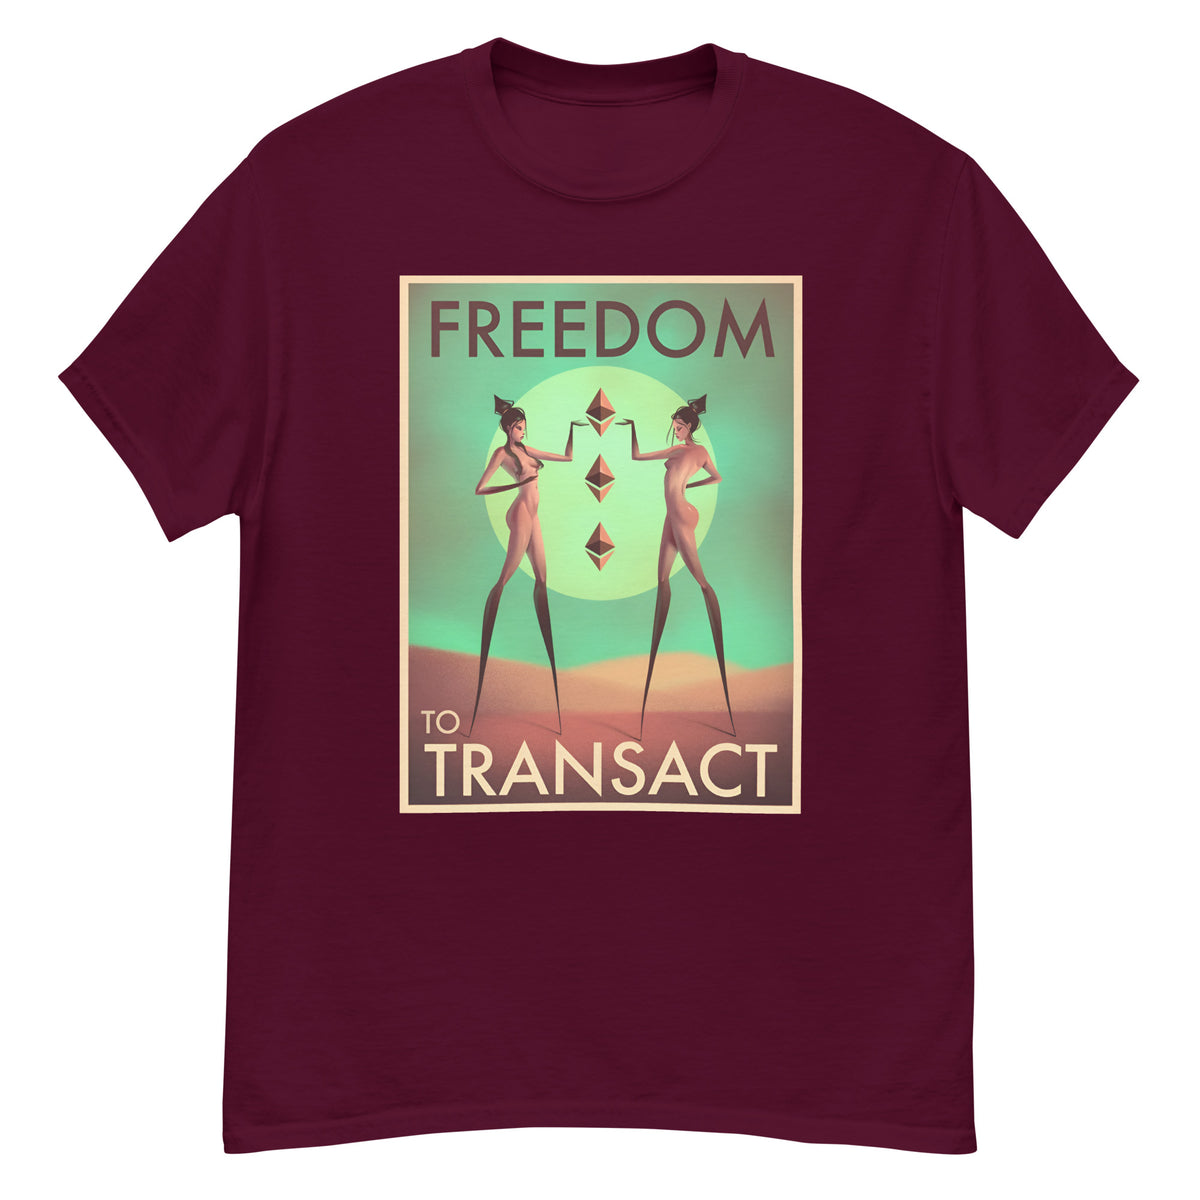 Transcendent Trades by Camibus | Classic tee